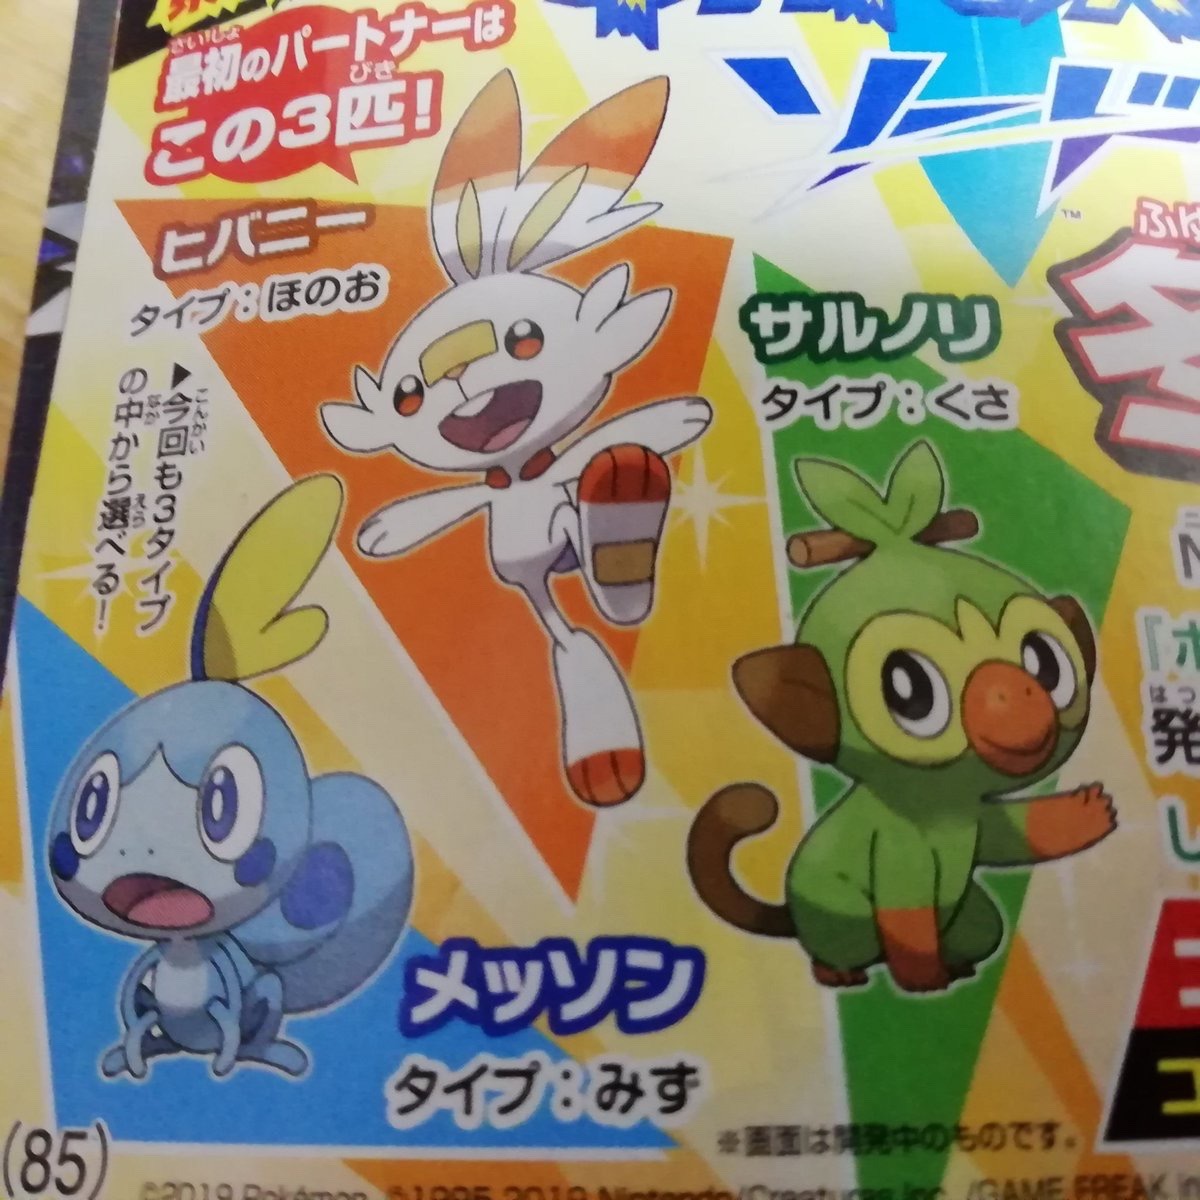 Forge A Path To Greatness The First Images From Corocoro